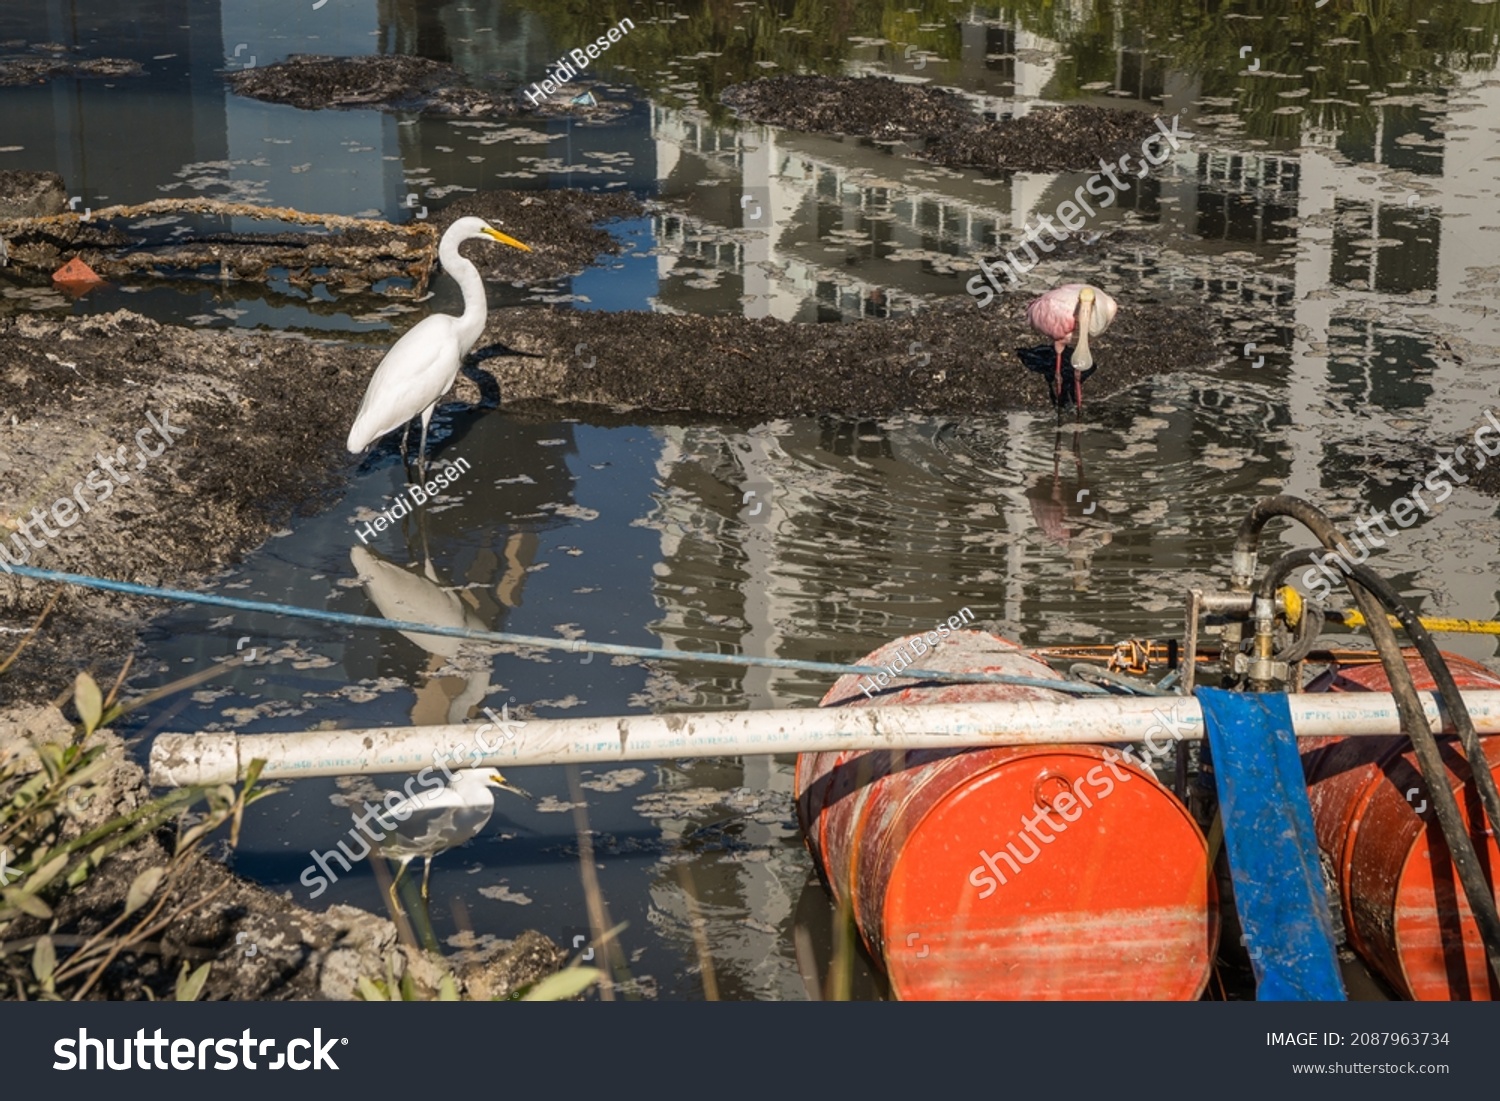 Birds in small polluted pond as real estate development encroaches on their habitat. #2087963734